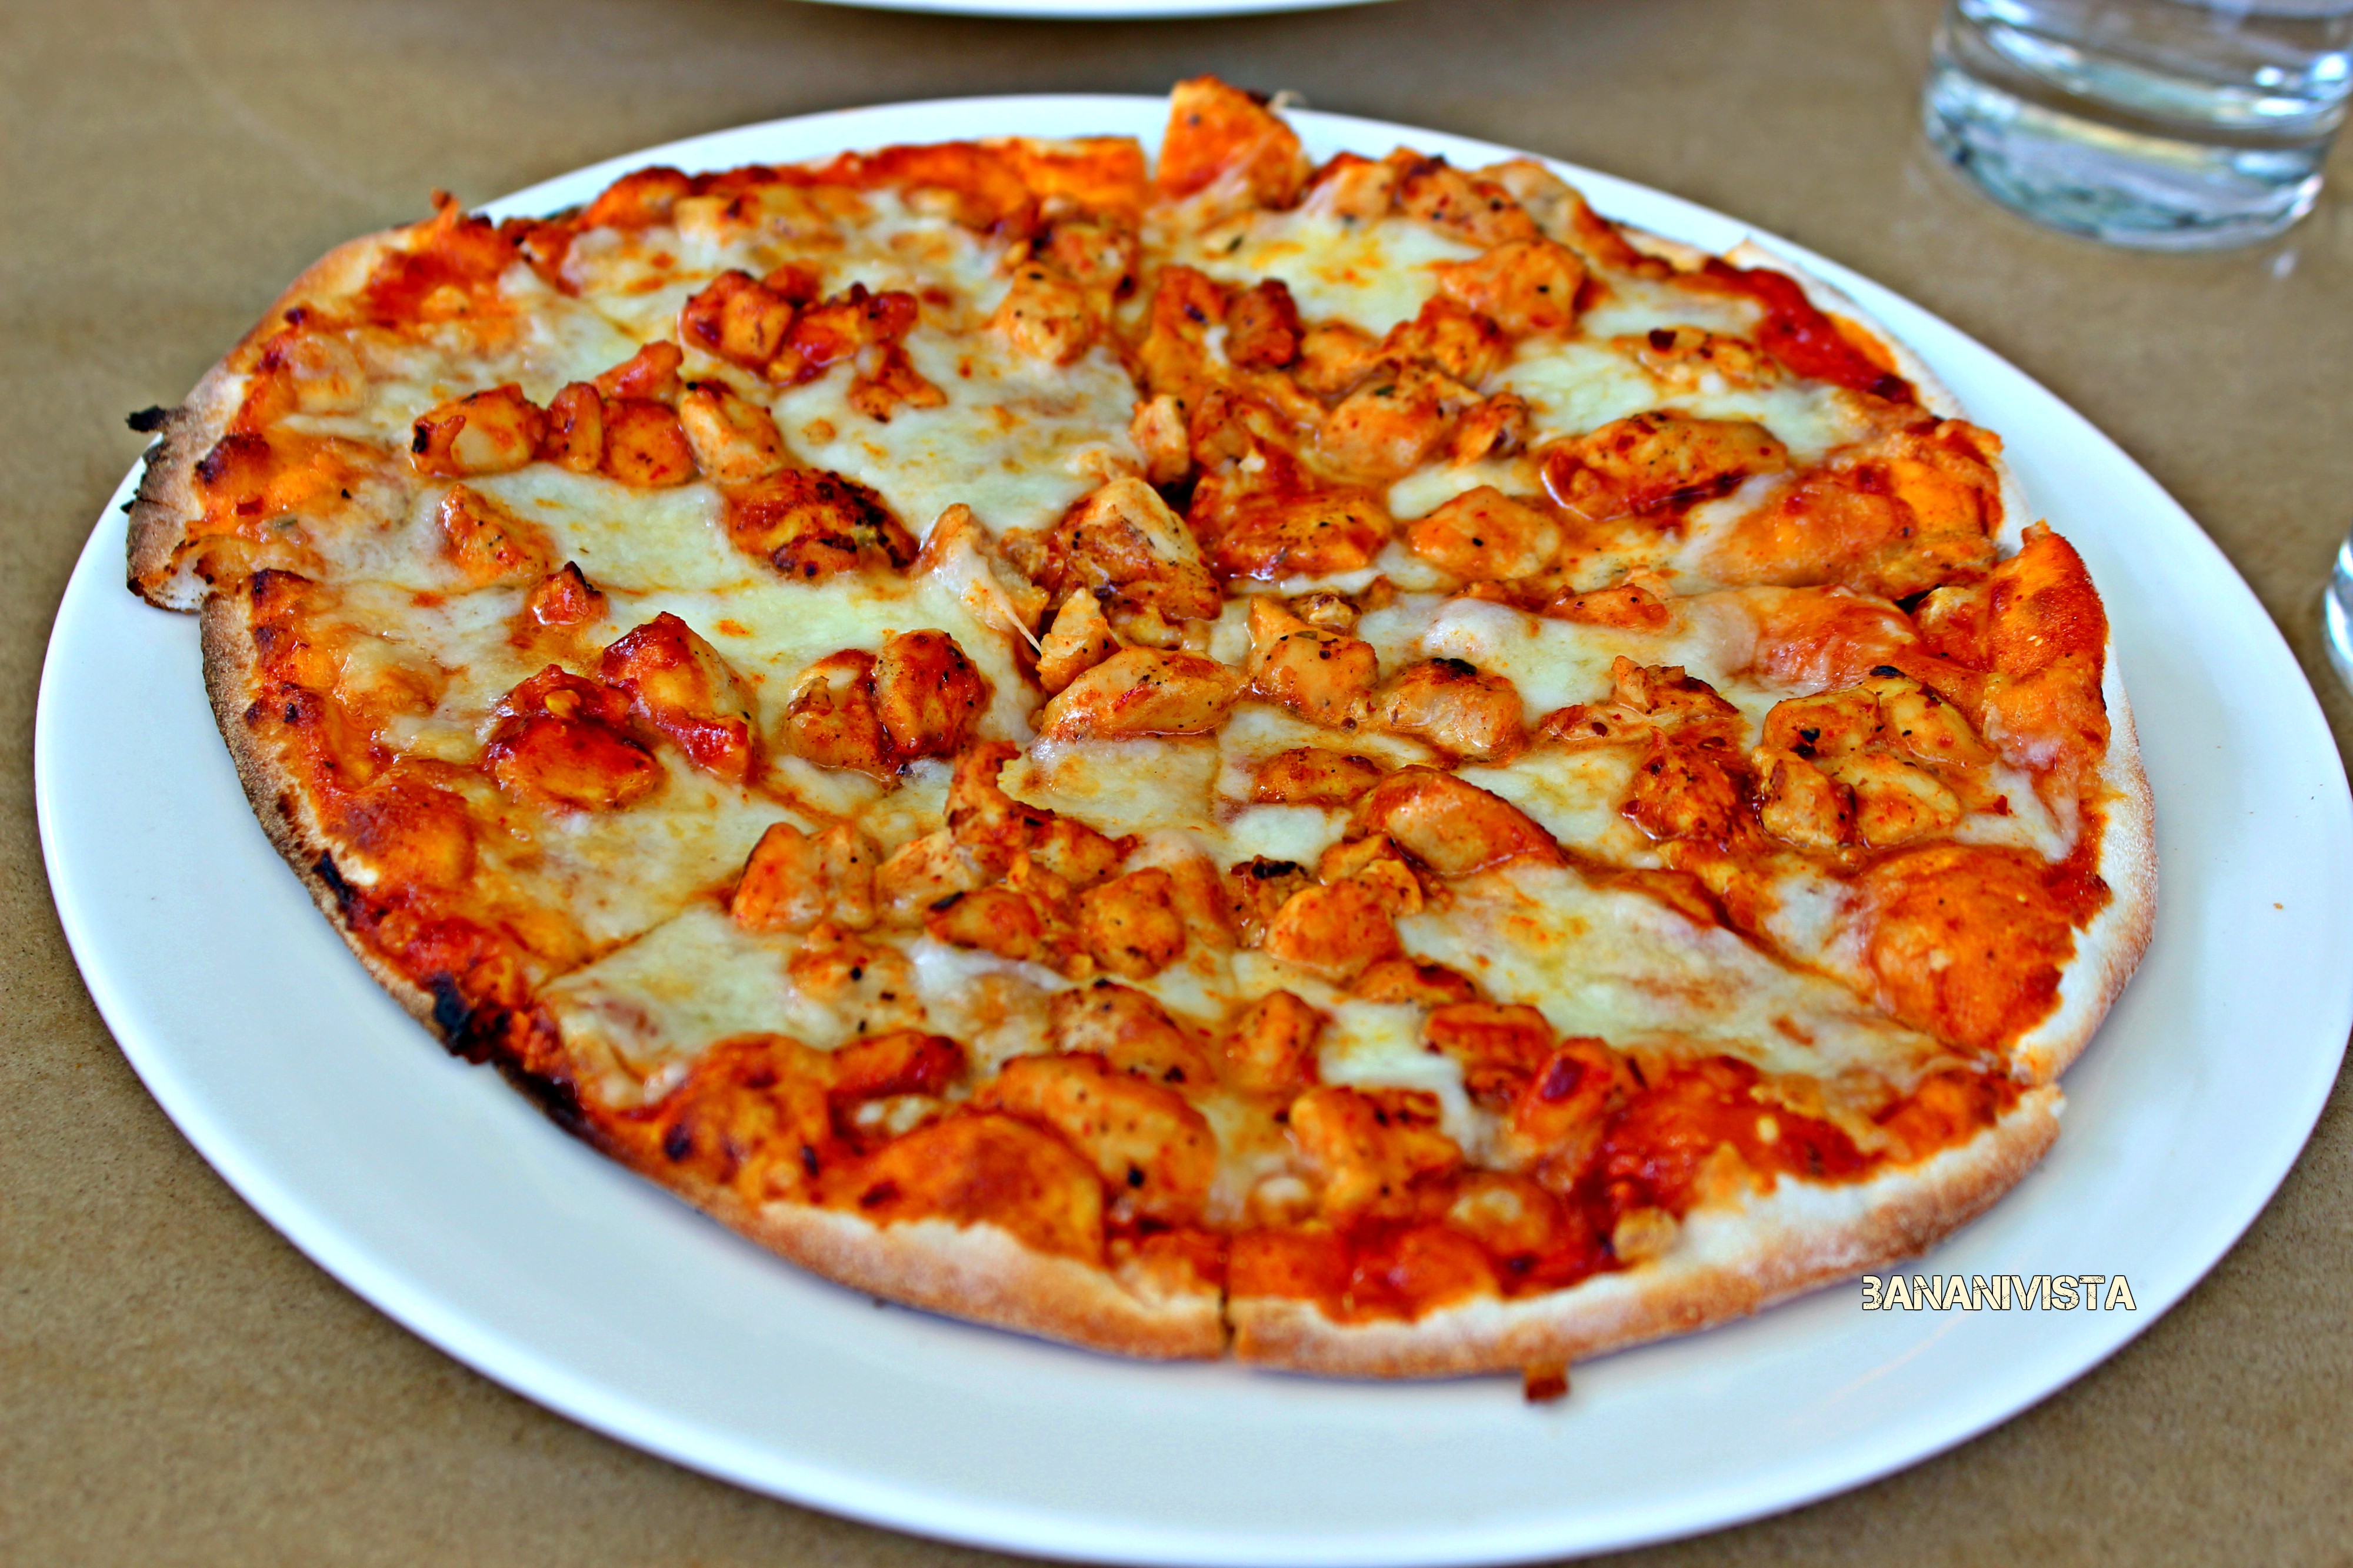  The Barbeque Chicken Pizza from the wood fire pizza counter